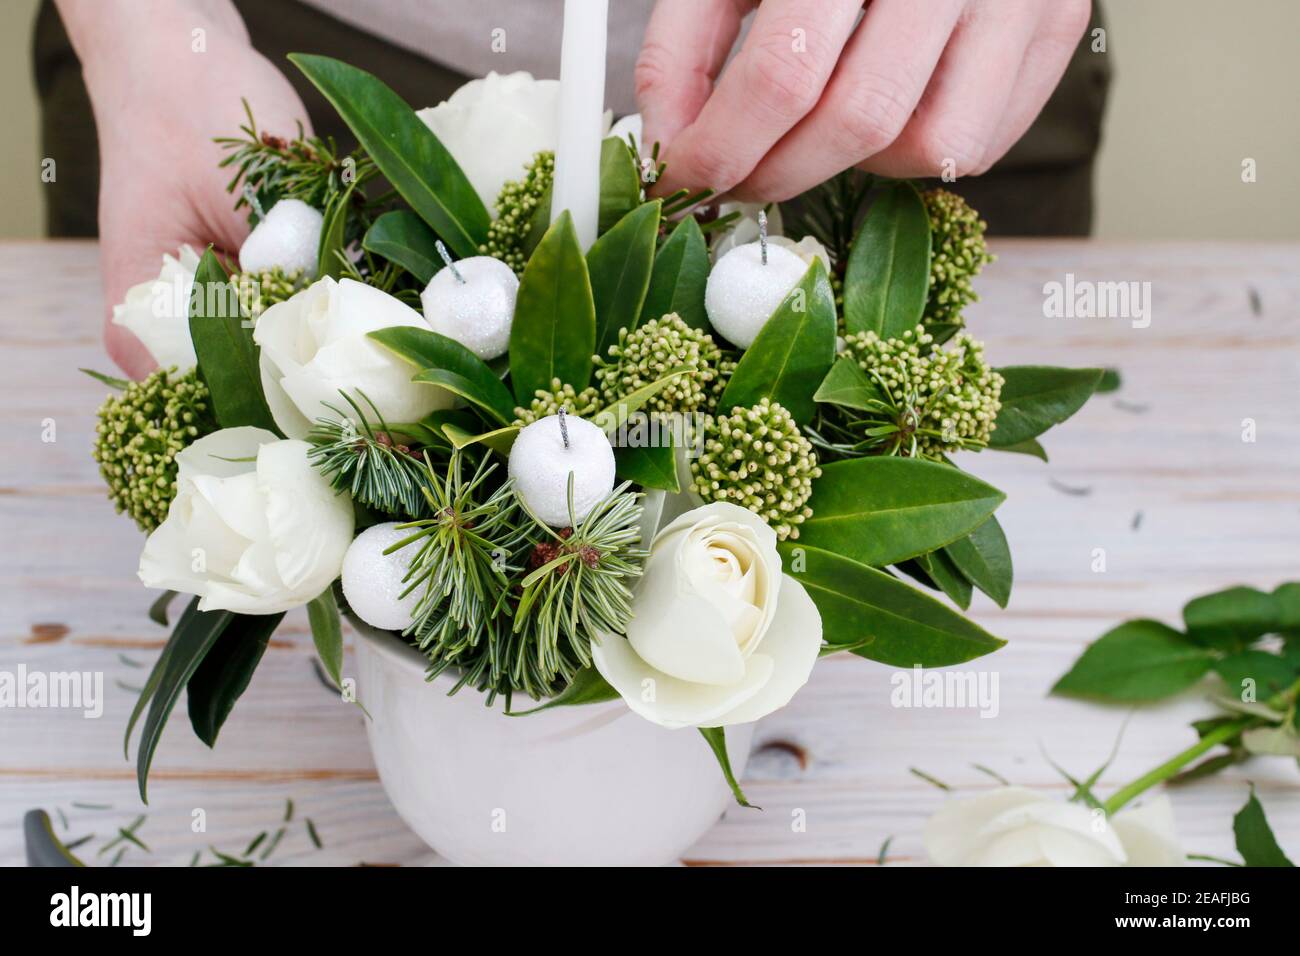 Florist at work: woman shows how to make floral arrangement with white roses, skimmia, an evergreen shrub, and fir twigs. Step by step, tutorial. Stock Photo